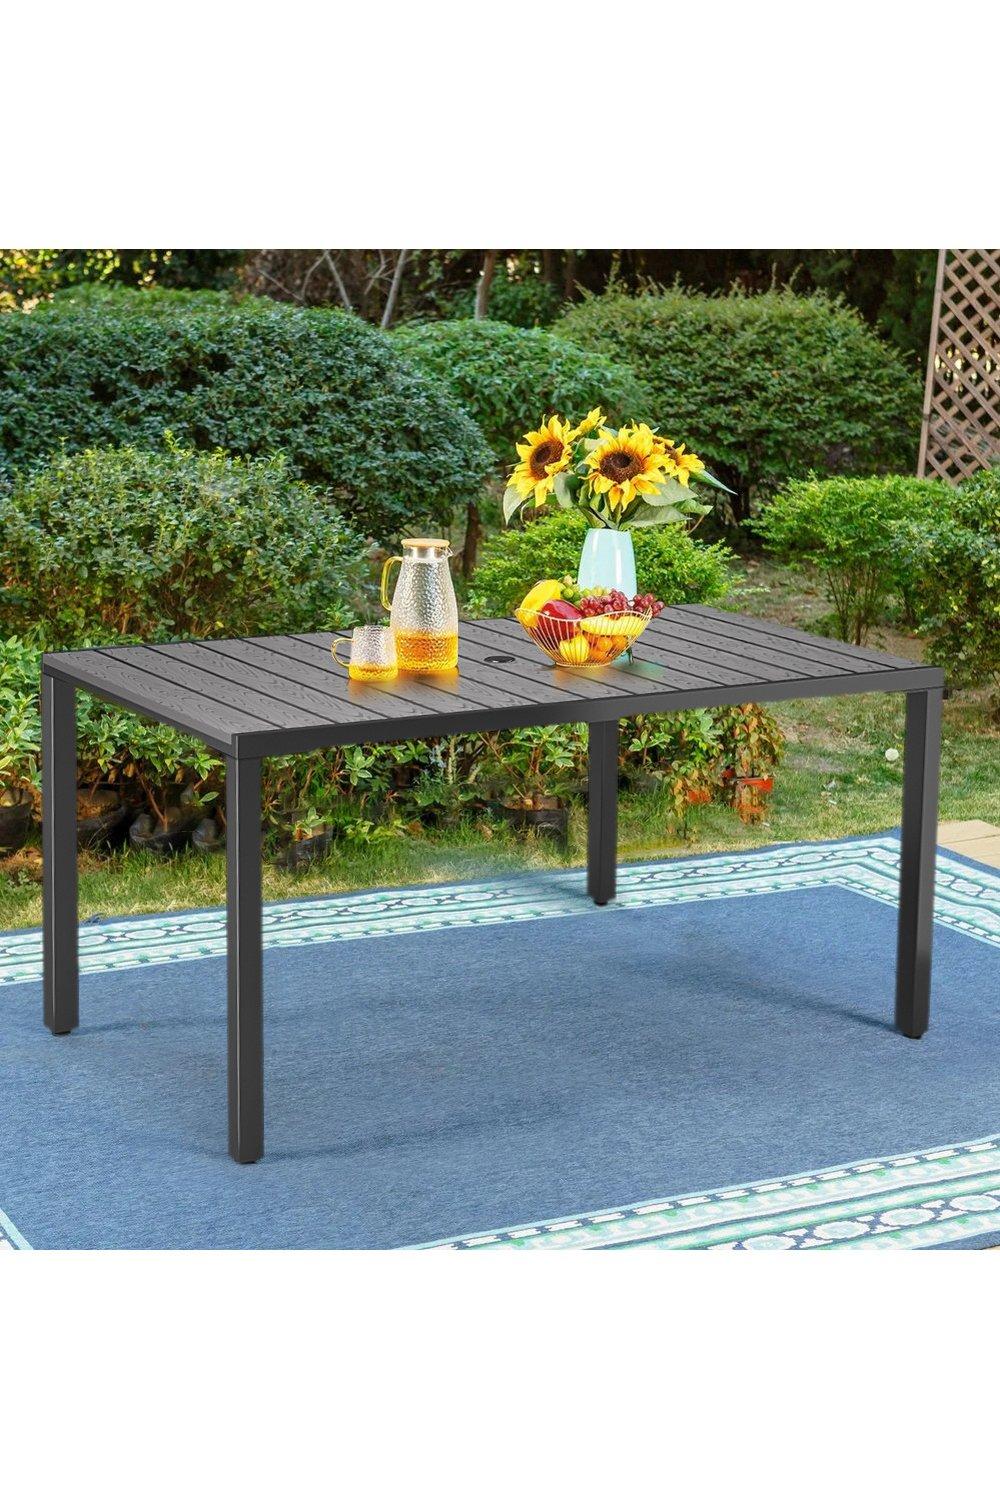 Wood Effect Outdoor Garden Dining Table